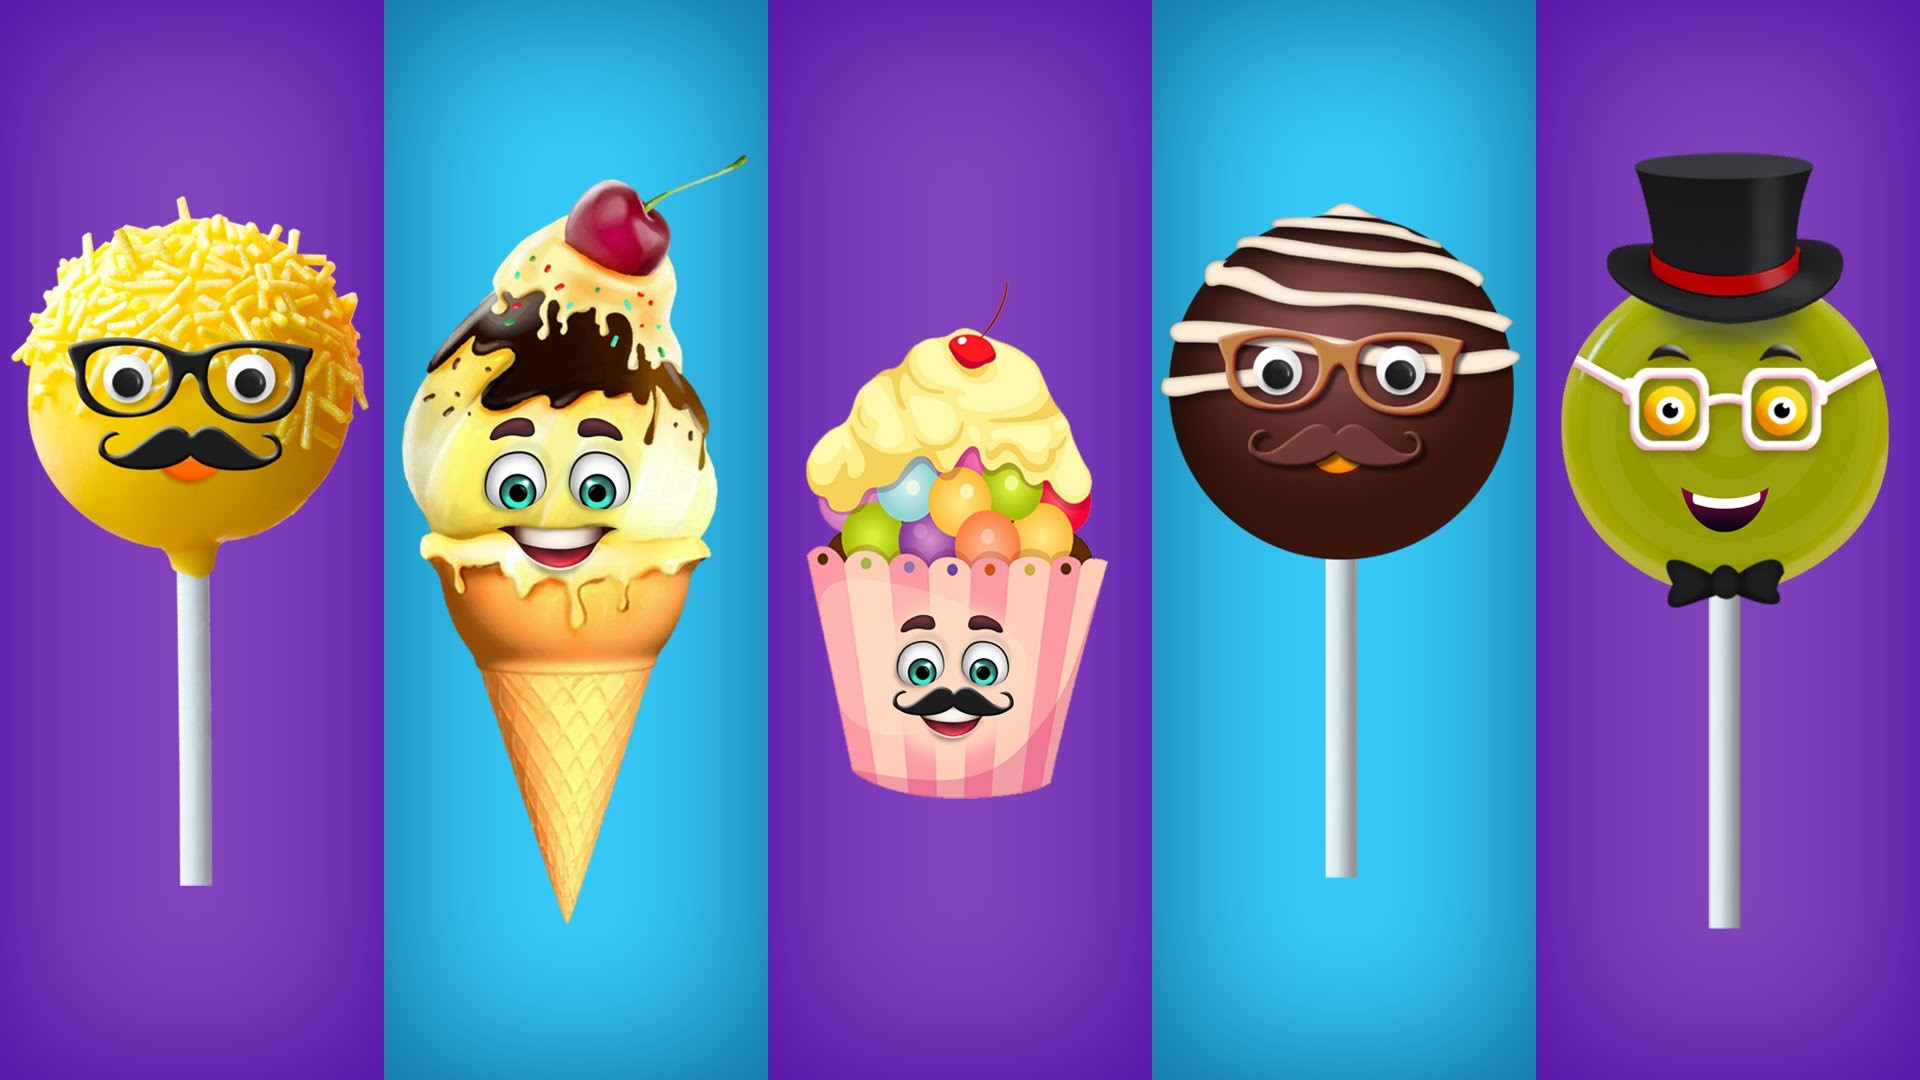 1920x1080 Cake Pop, Ice Cream, Cup Cake, Chocolate and Lollipop Finger Family Songs -  YouTube